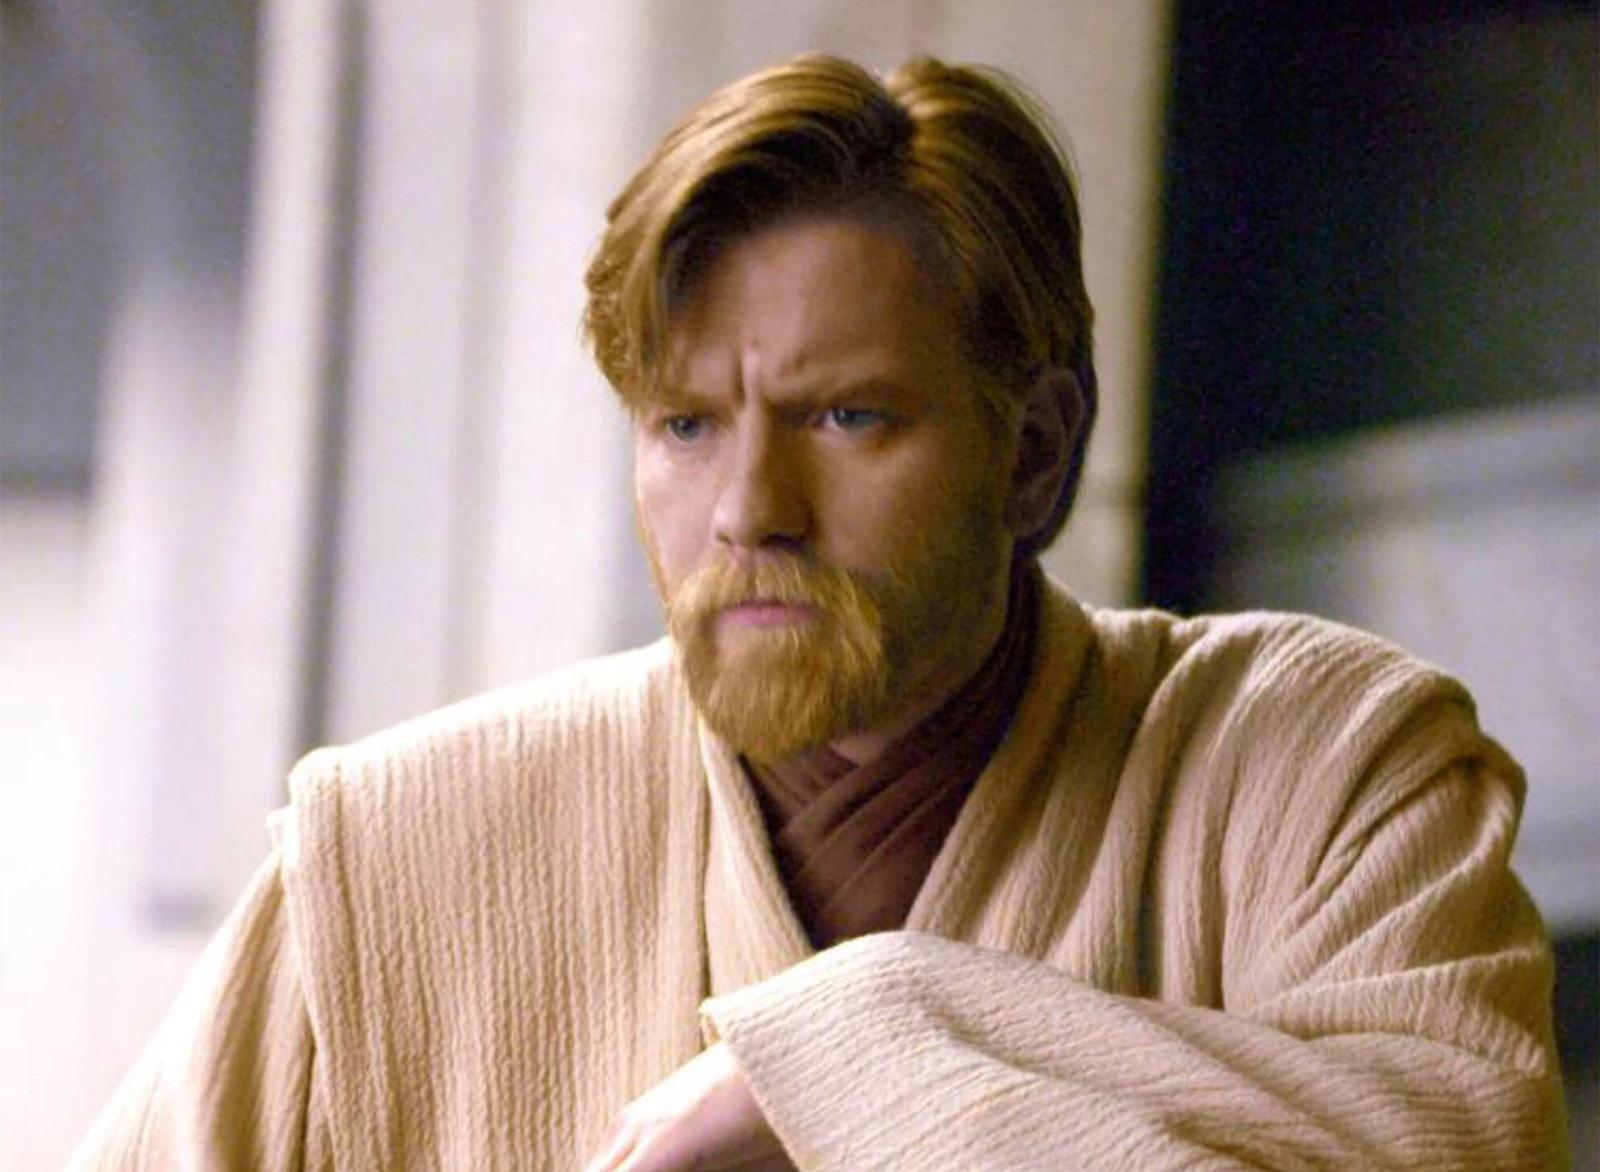 Kenobi Series Wasn't That Bad After All, But There Were Some Misses - image 1